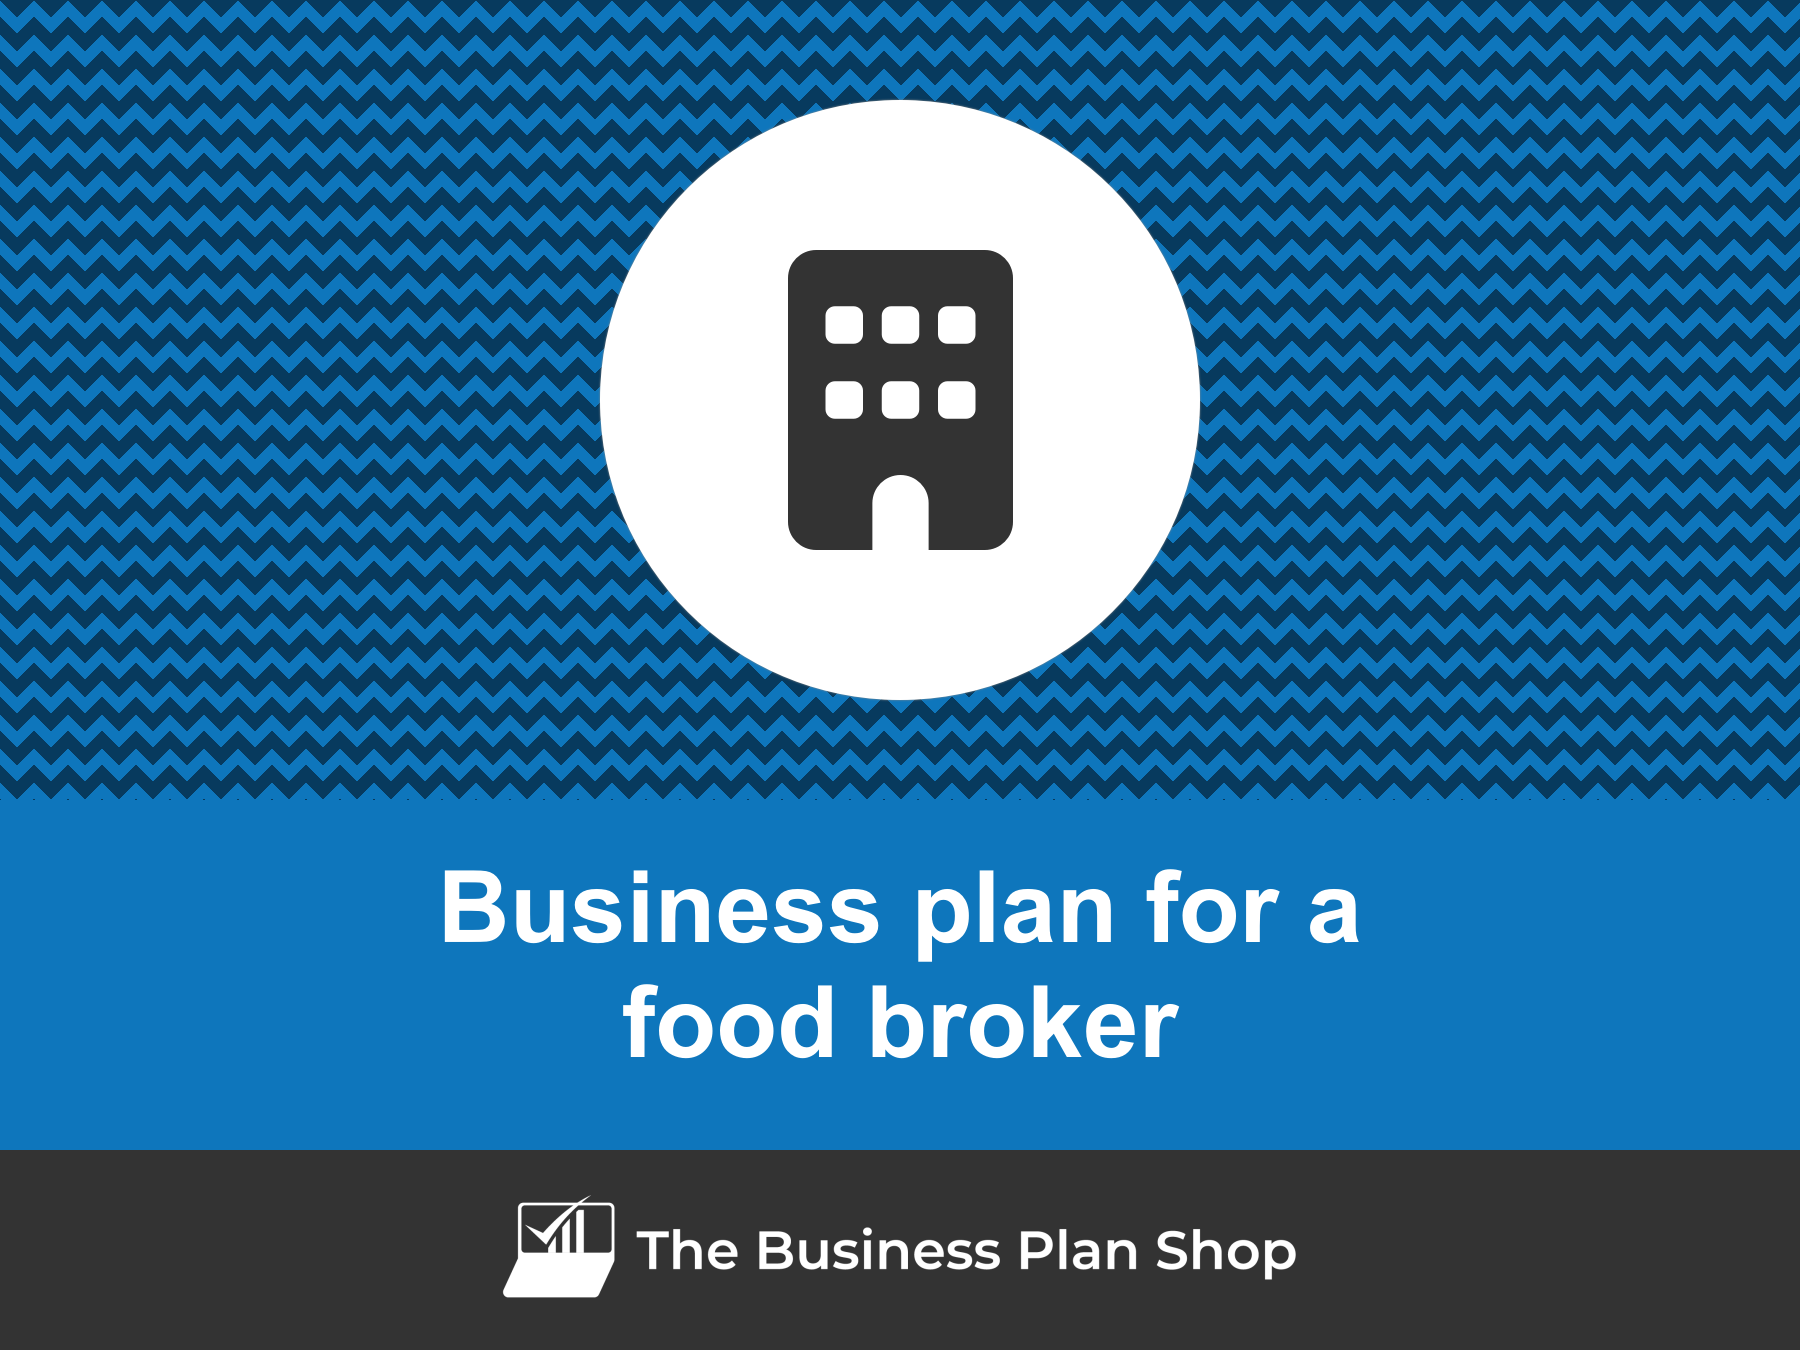 How to write a business plan for a food broker?